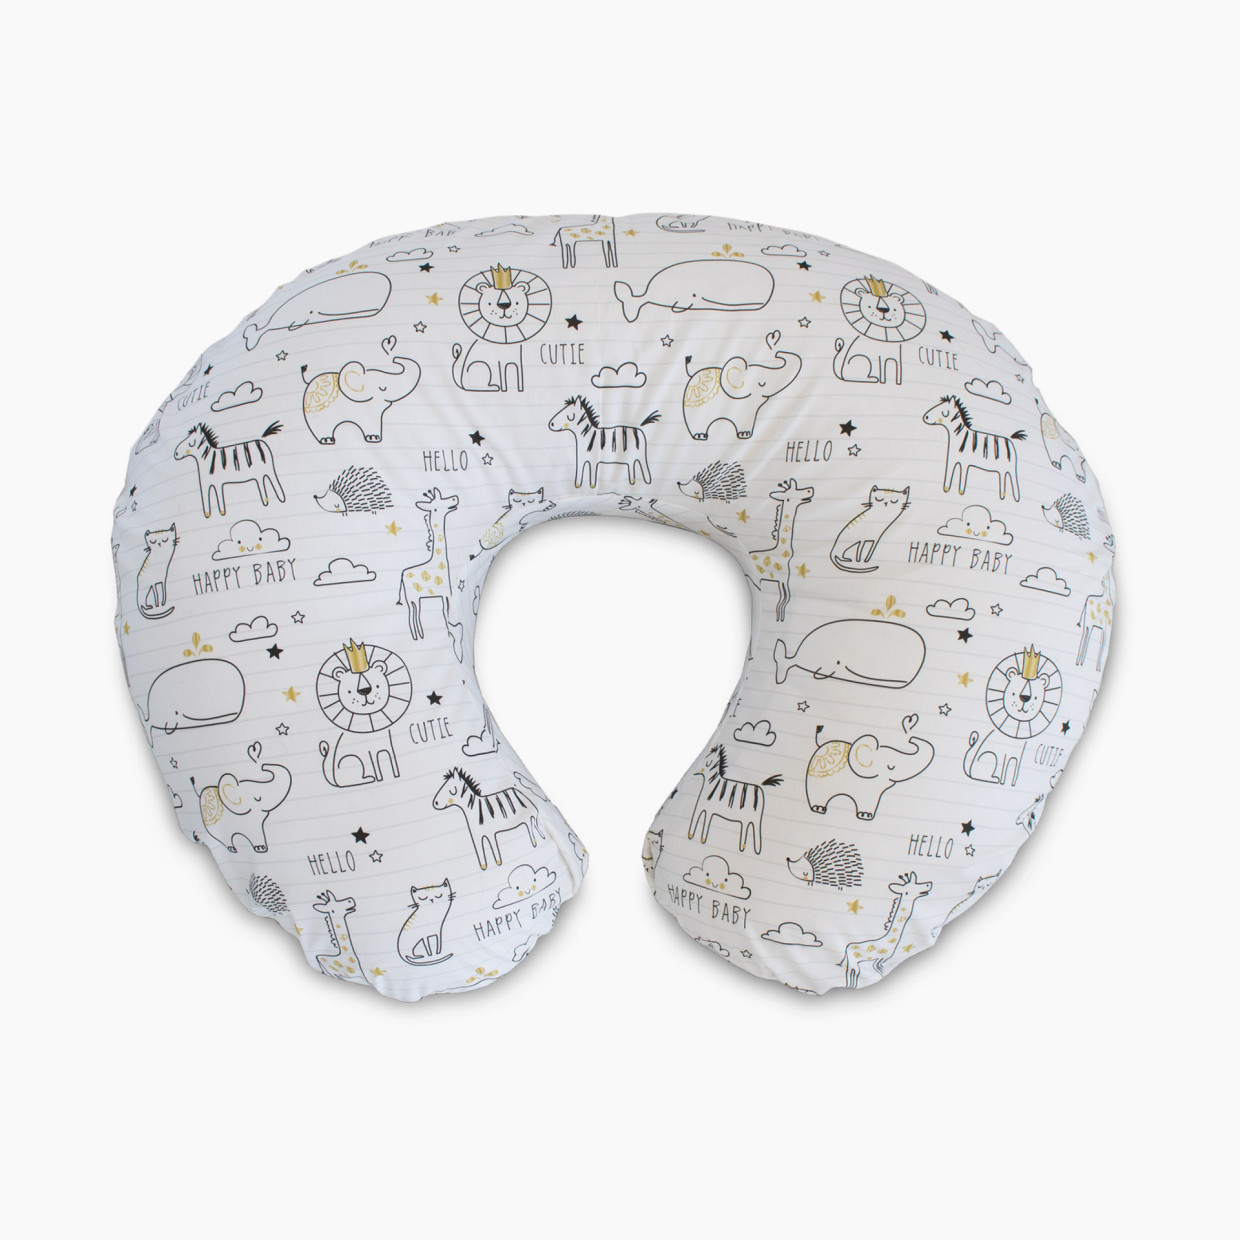  Boppy Nursing Pillow Original Support, Notebook, Ergonomic  Nursing Essentials for Bottle and Breastfeeding, Firm Fiber Fill, with  Removable Nursing Pillow Cover, Machine Washable : Baby